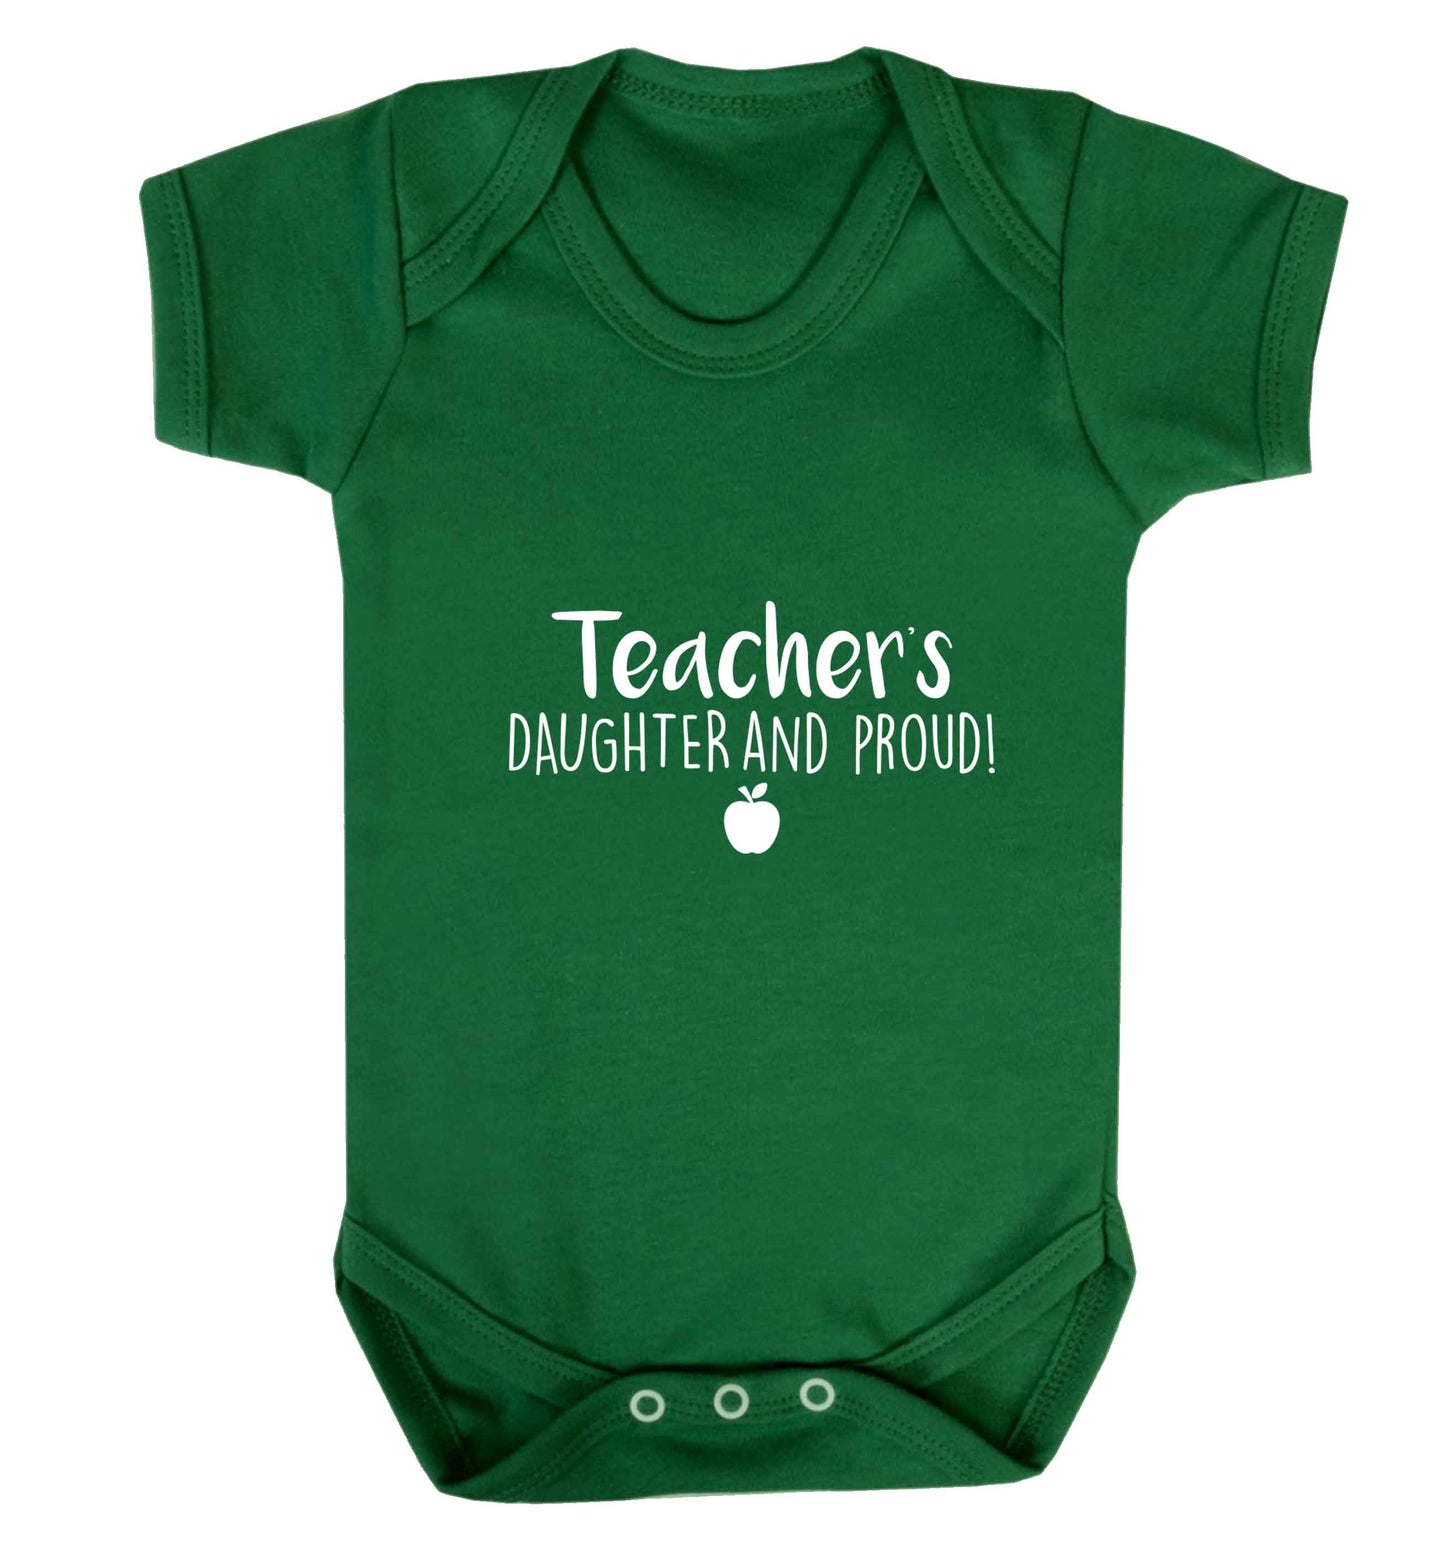 Teachers daughter and proud baby vest green 18-24 months